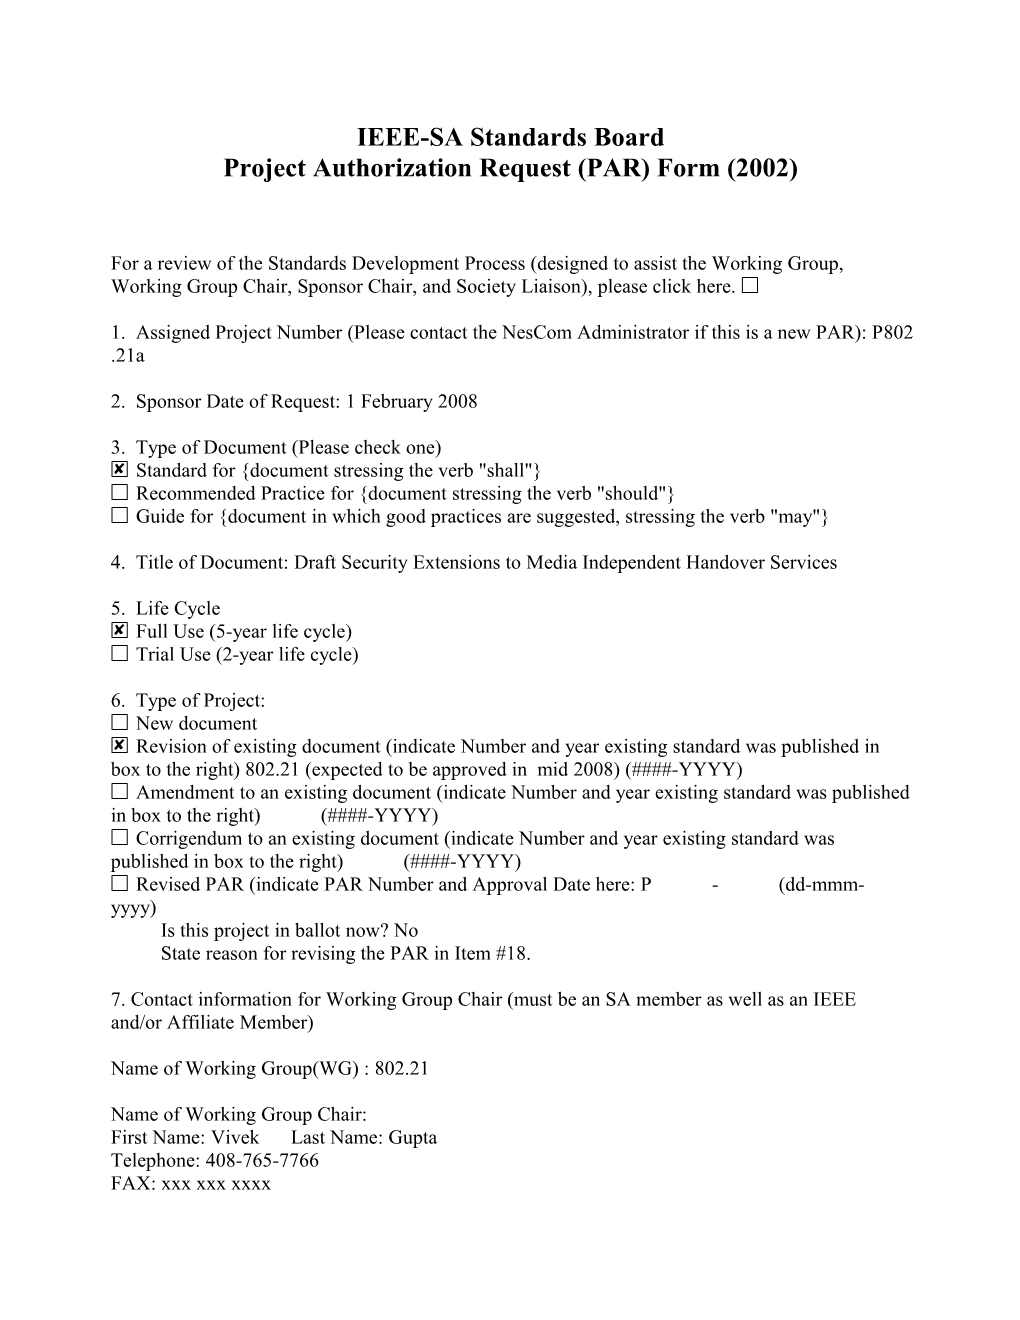 IEEE-SA Standards Board Project Authorization Request (PAR) Form (2002)